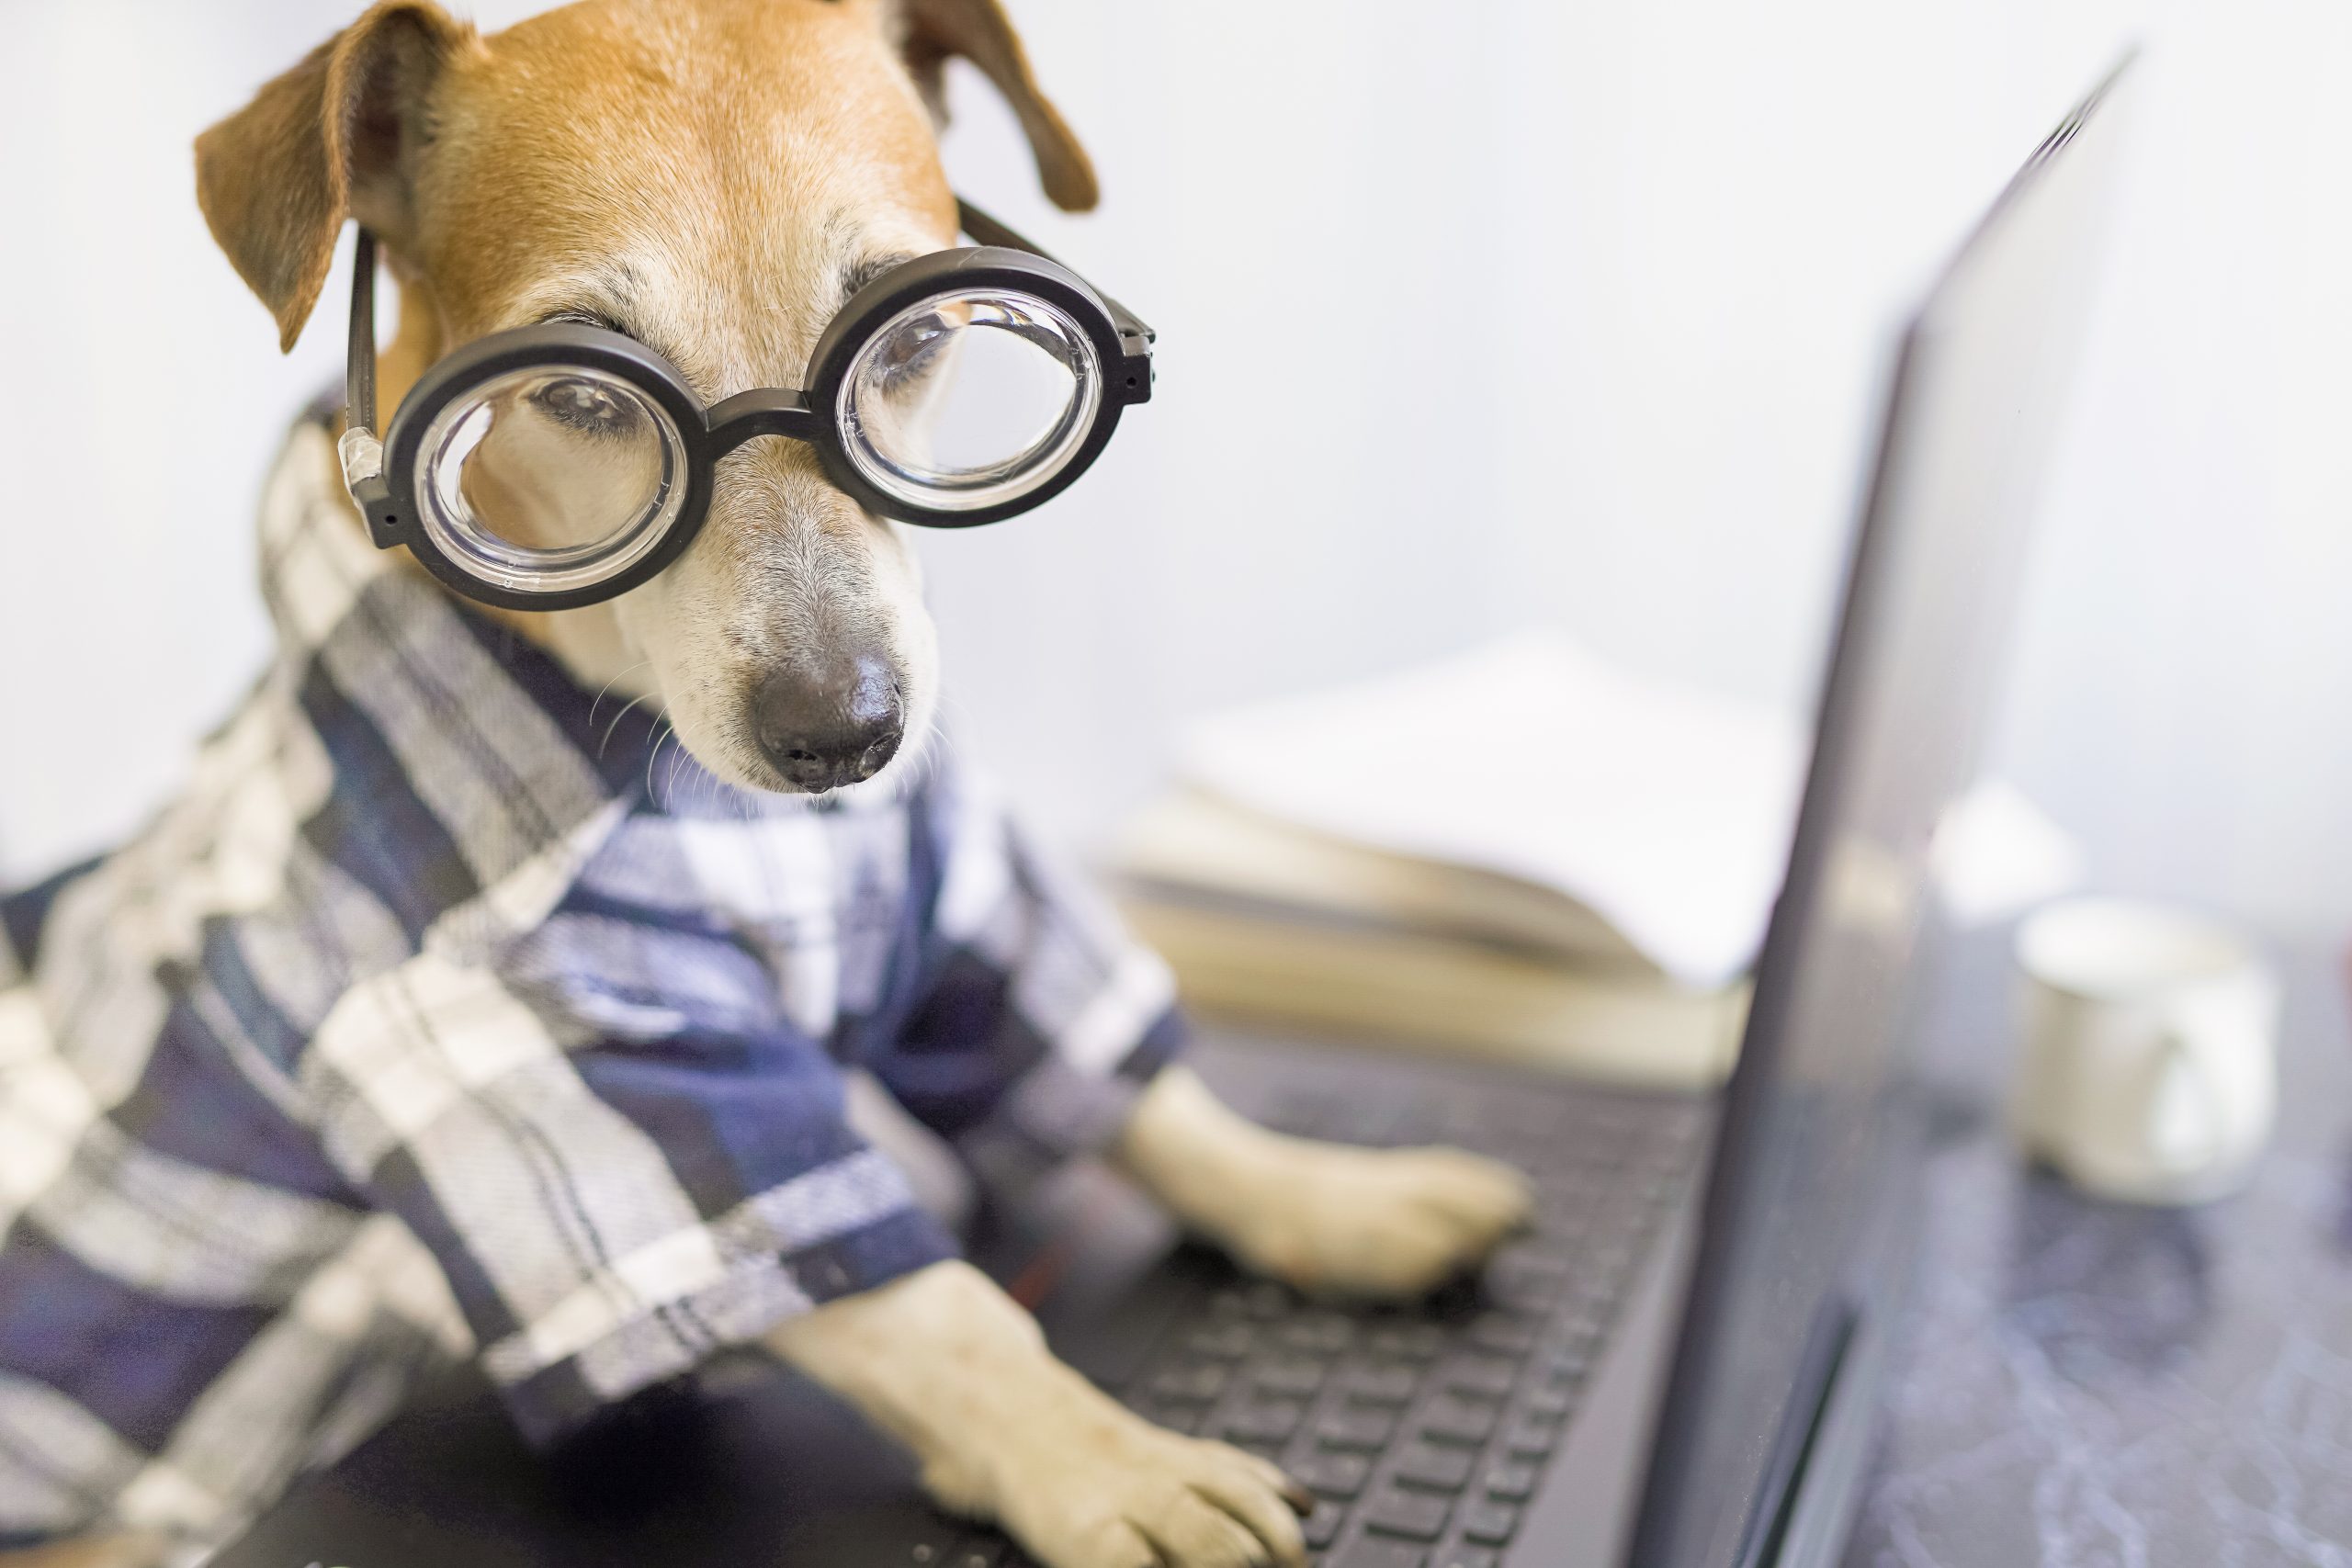 https://depositphotos.com/357481154/stock-photo-adorable-dog-working-project-online.html